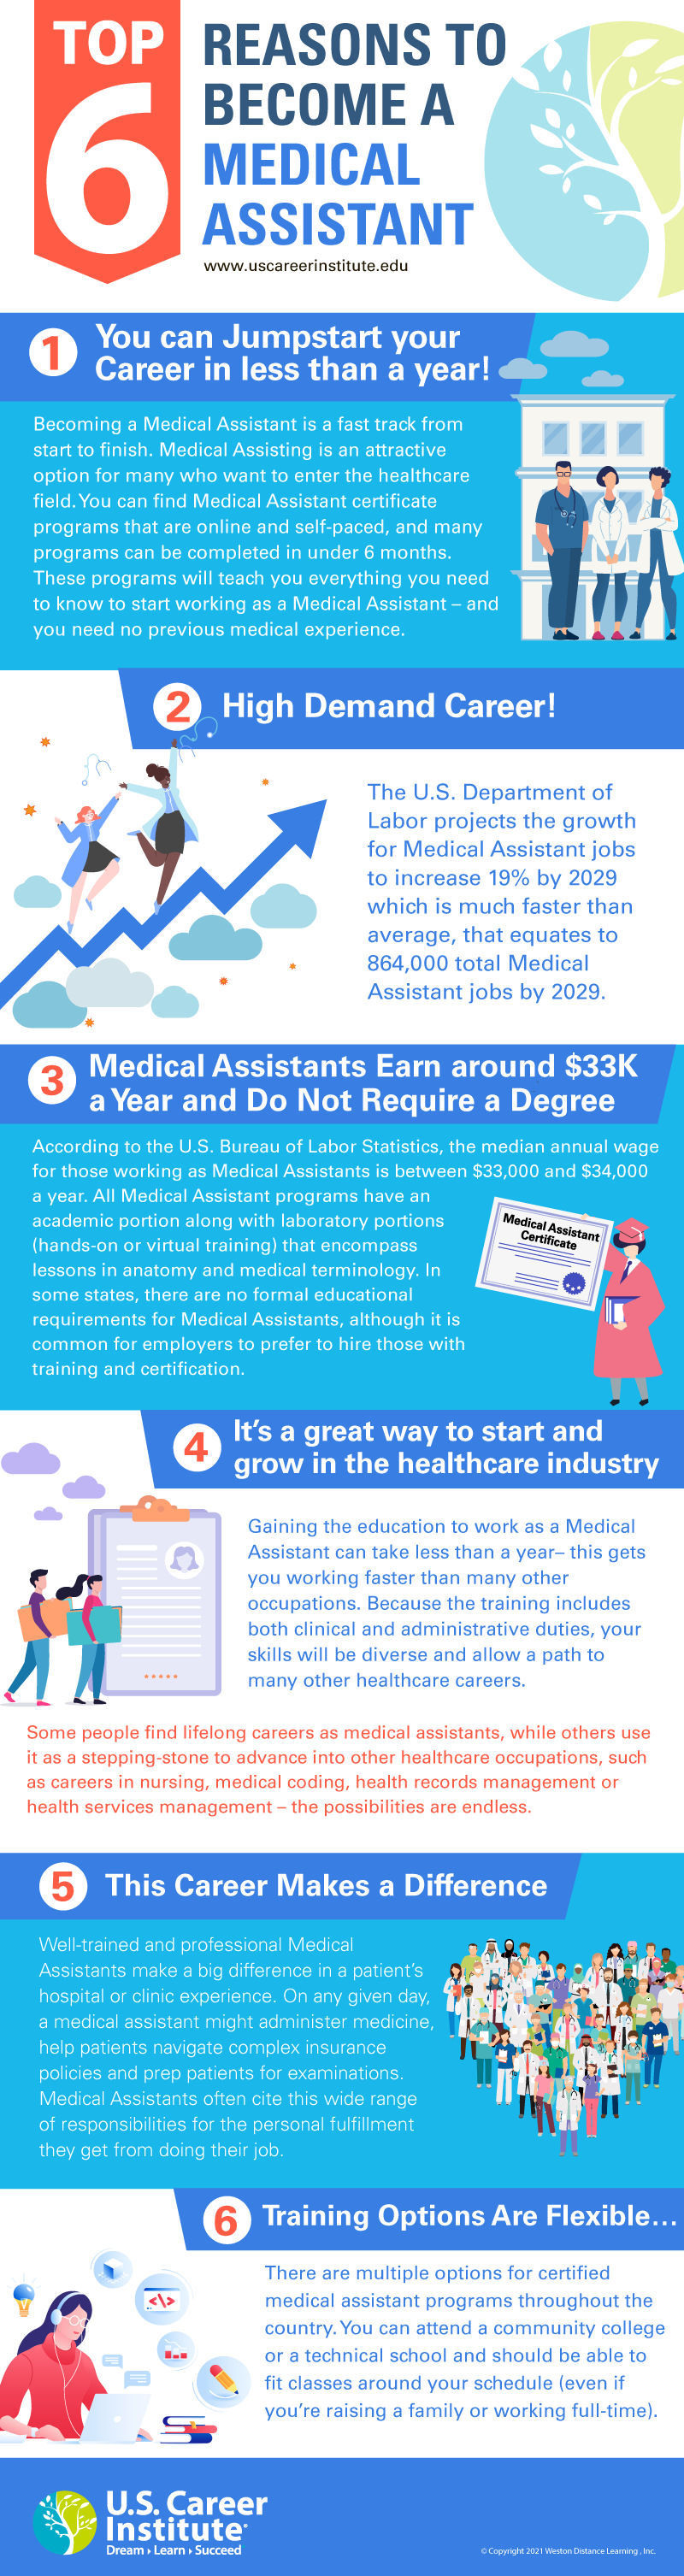 Top 6 Reasons to Become a Medical Assistant